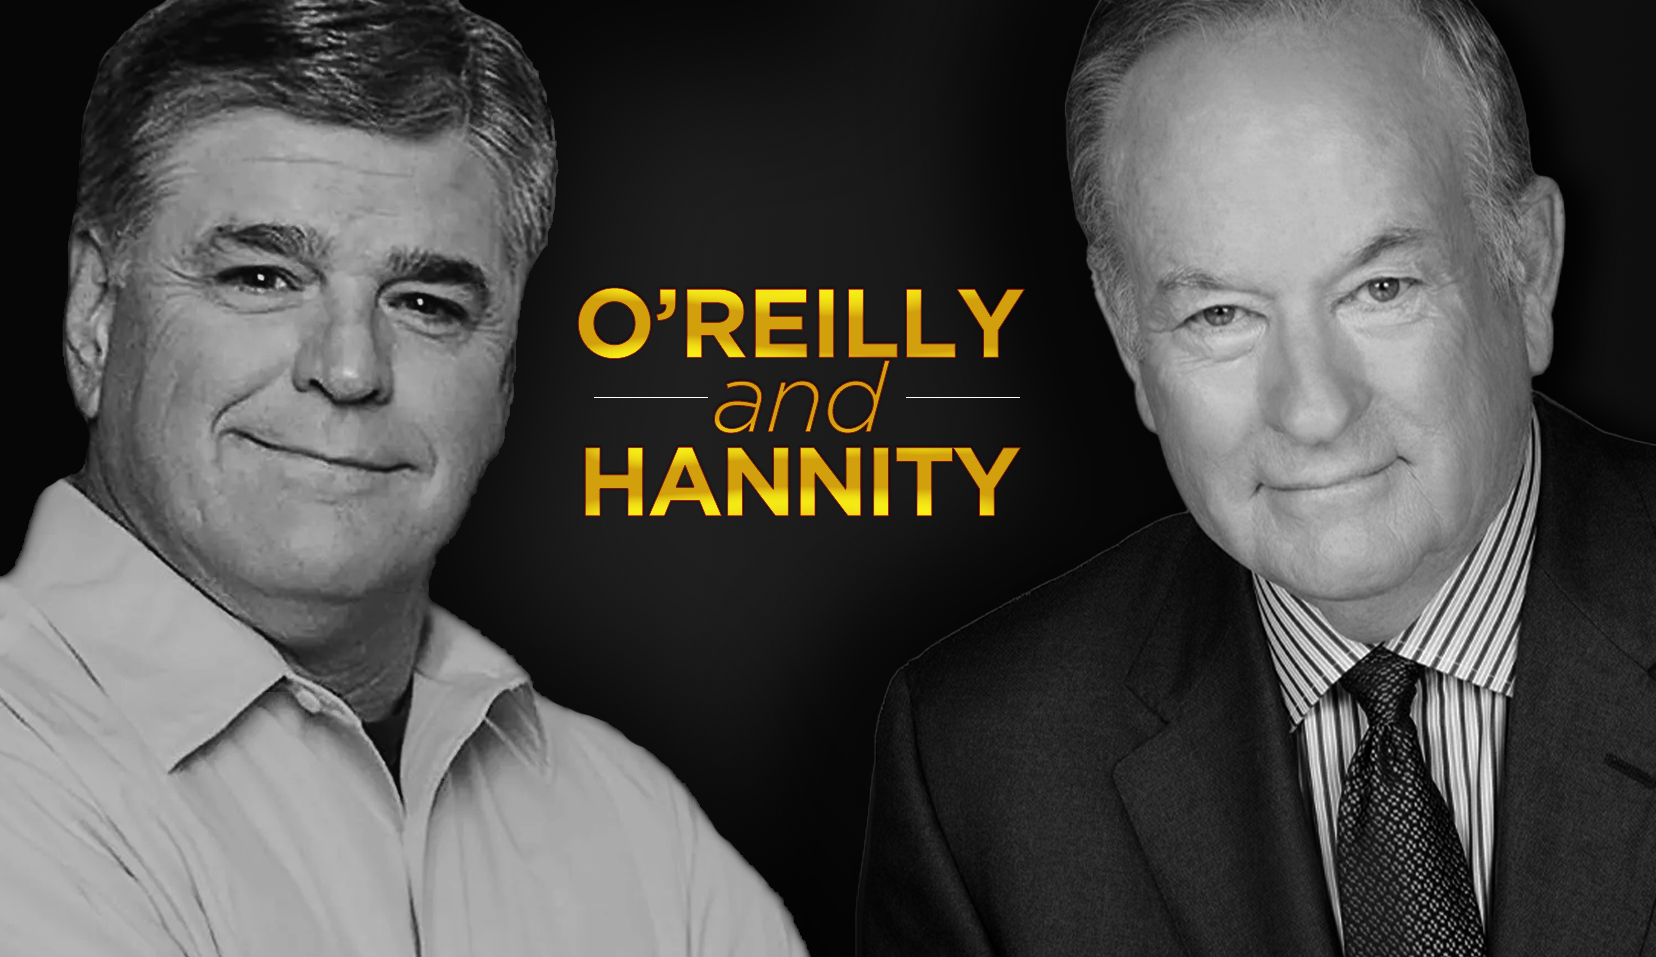 Listen: O'Reilly & Hannity on the Jan 6 Hearings, Hunter, and Trump